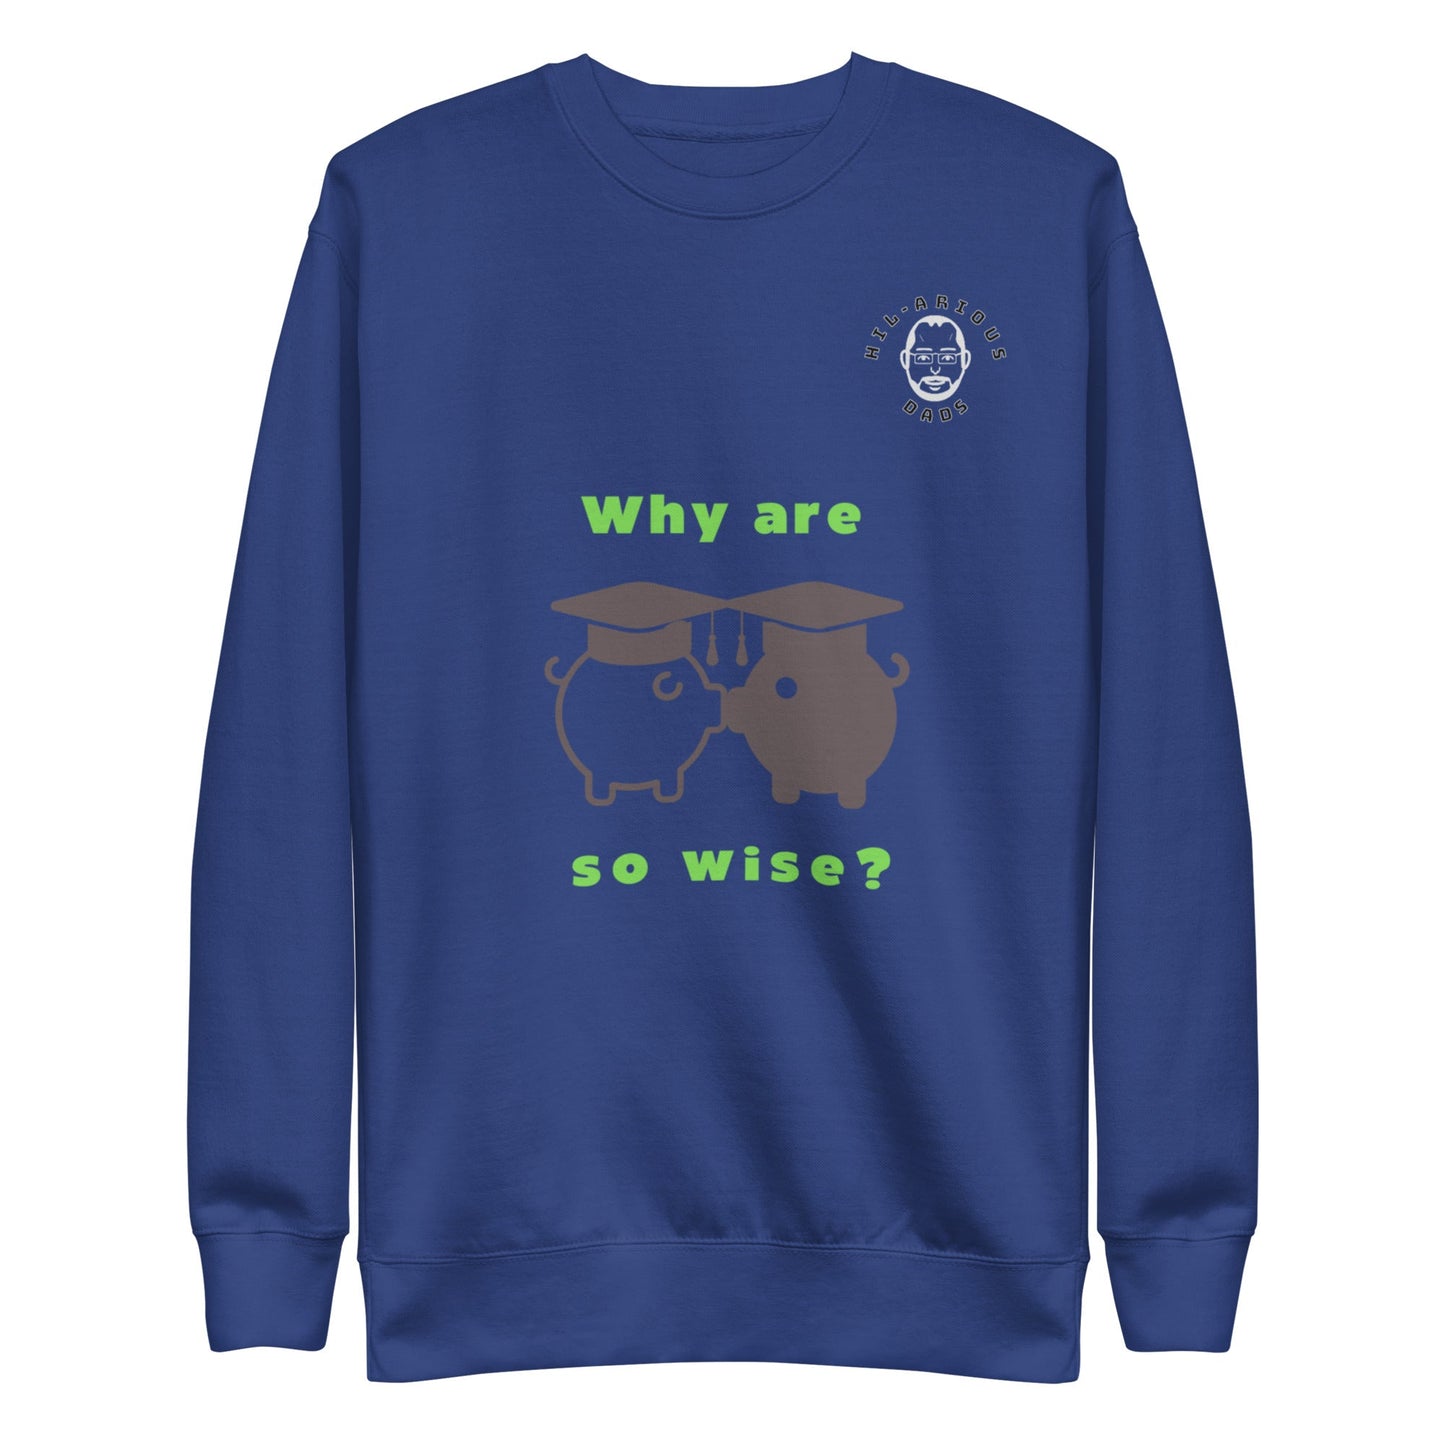 Why are Piggies so wise?-Sweatshirt - Hil-arious Dads